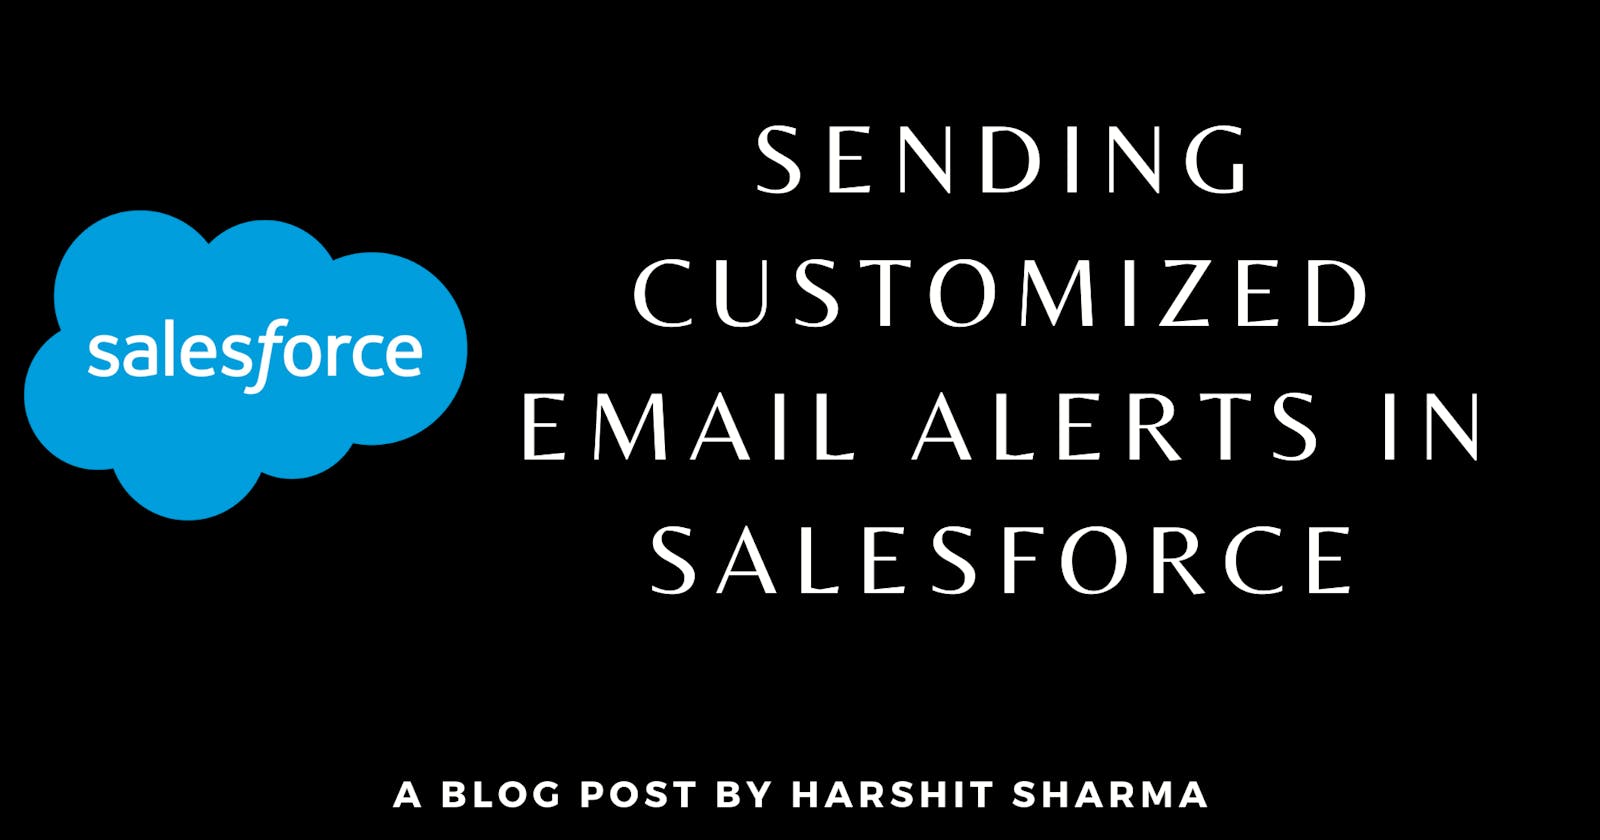 How to Send Customized Email using Email Alerts in Salesforce